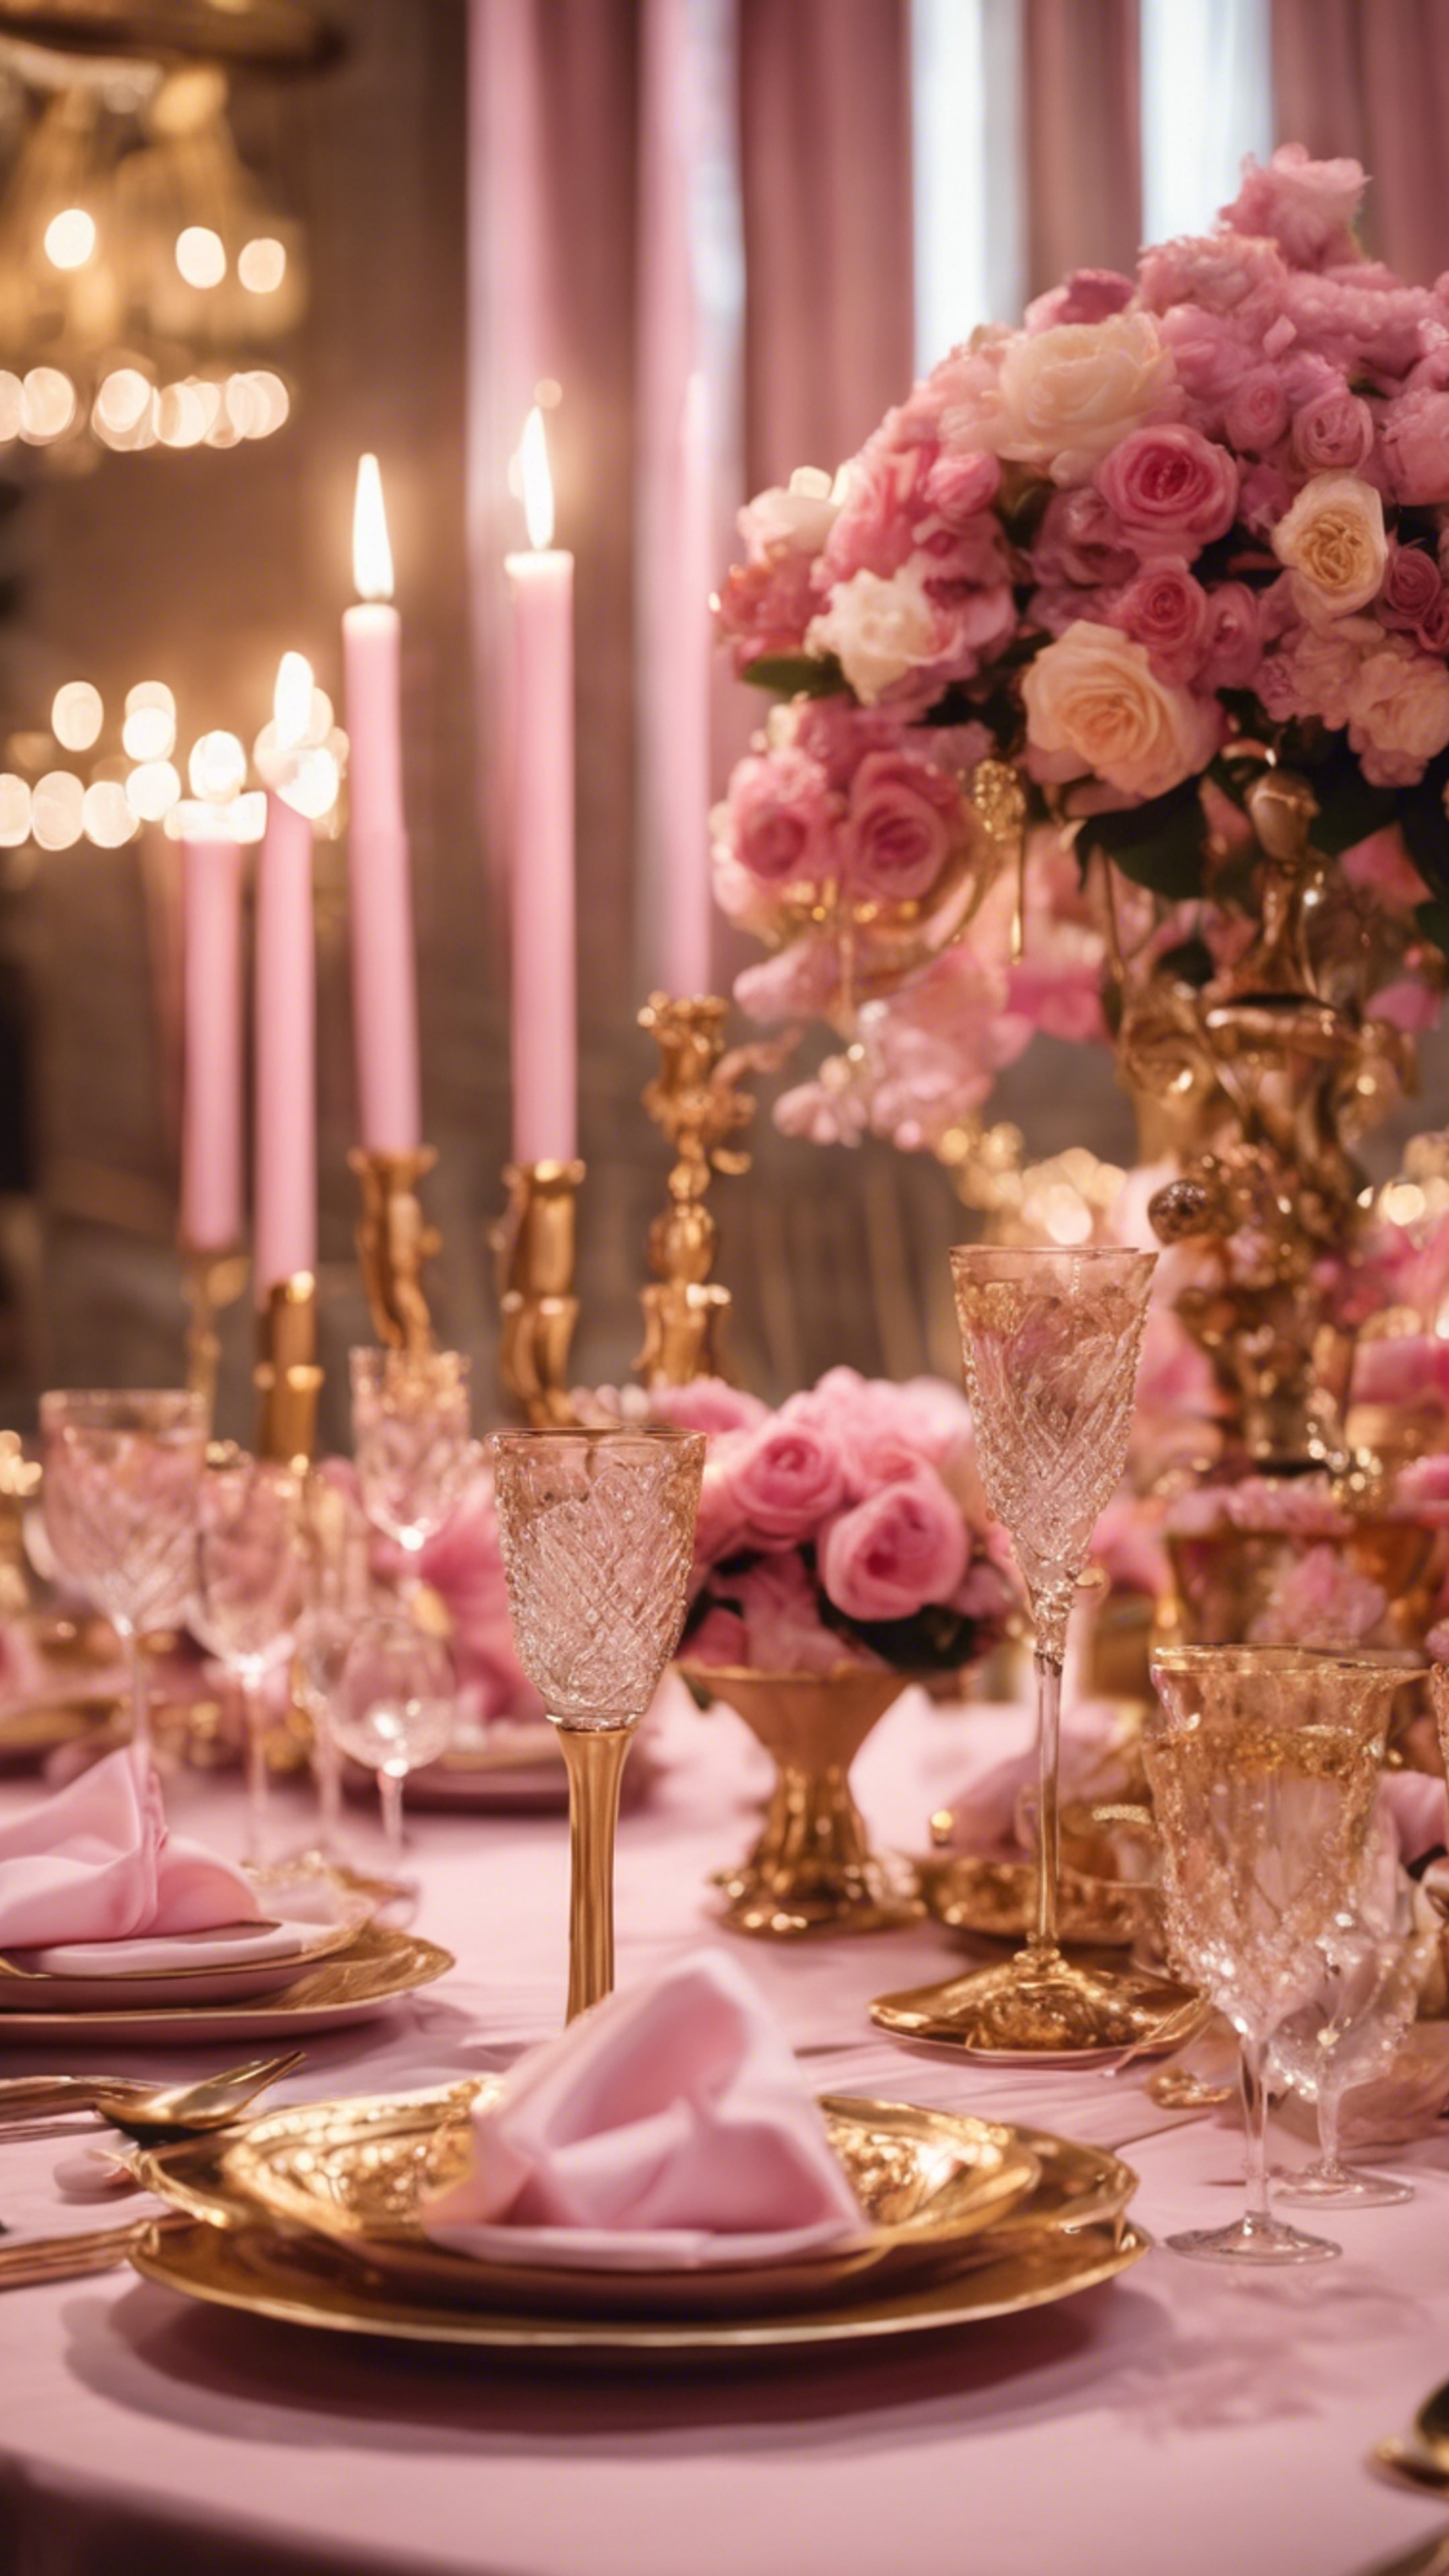 An elegant pink and gold-themed dining table set for an evening soiree. ផ្ទាំង​រូបភាព[a96f4c3be44f41948a30]